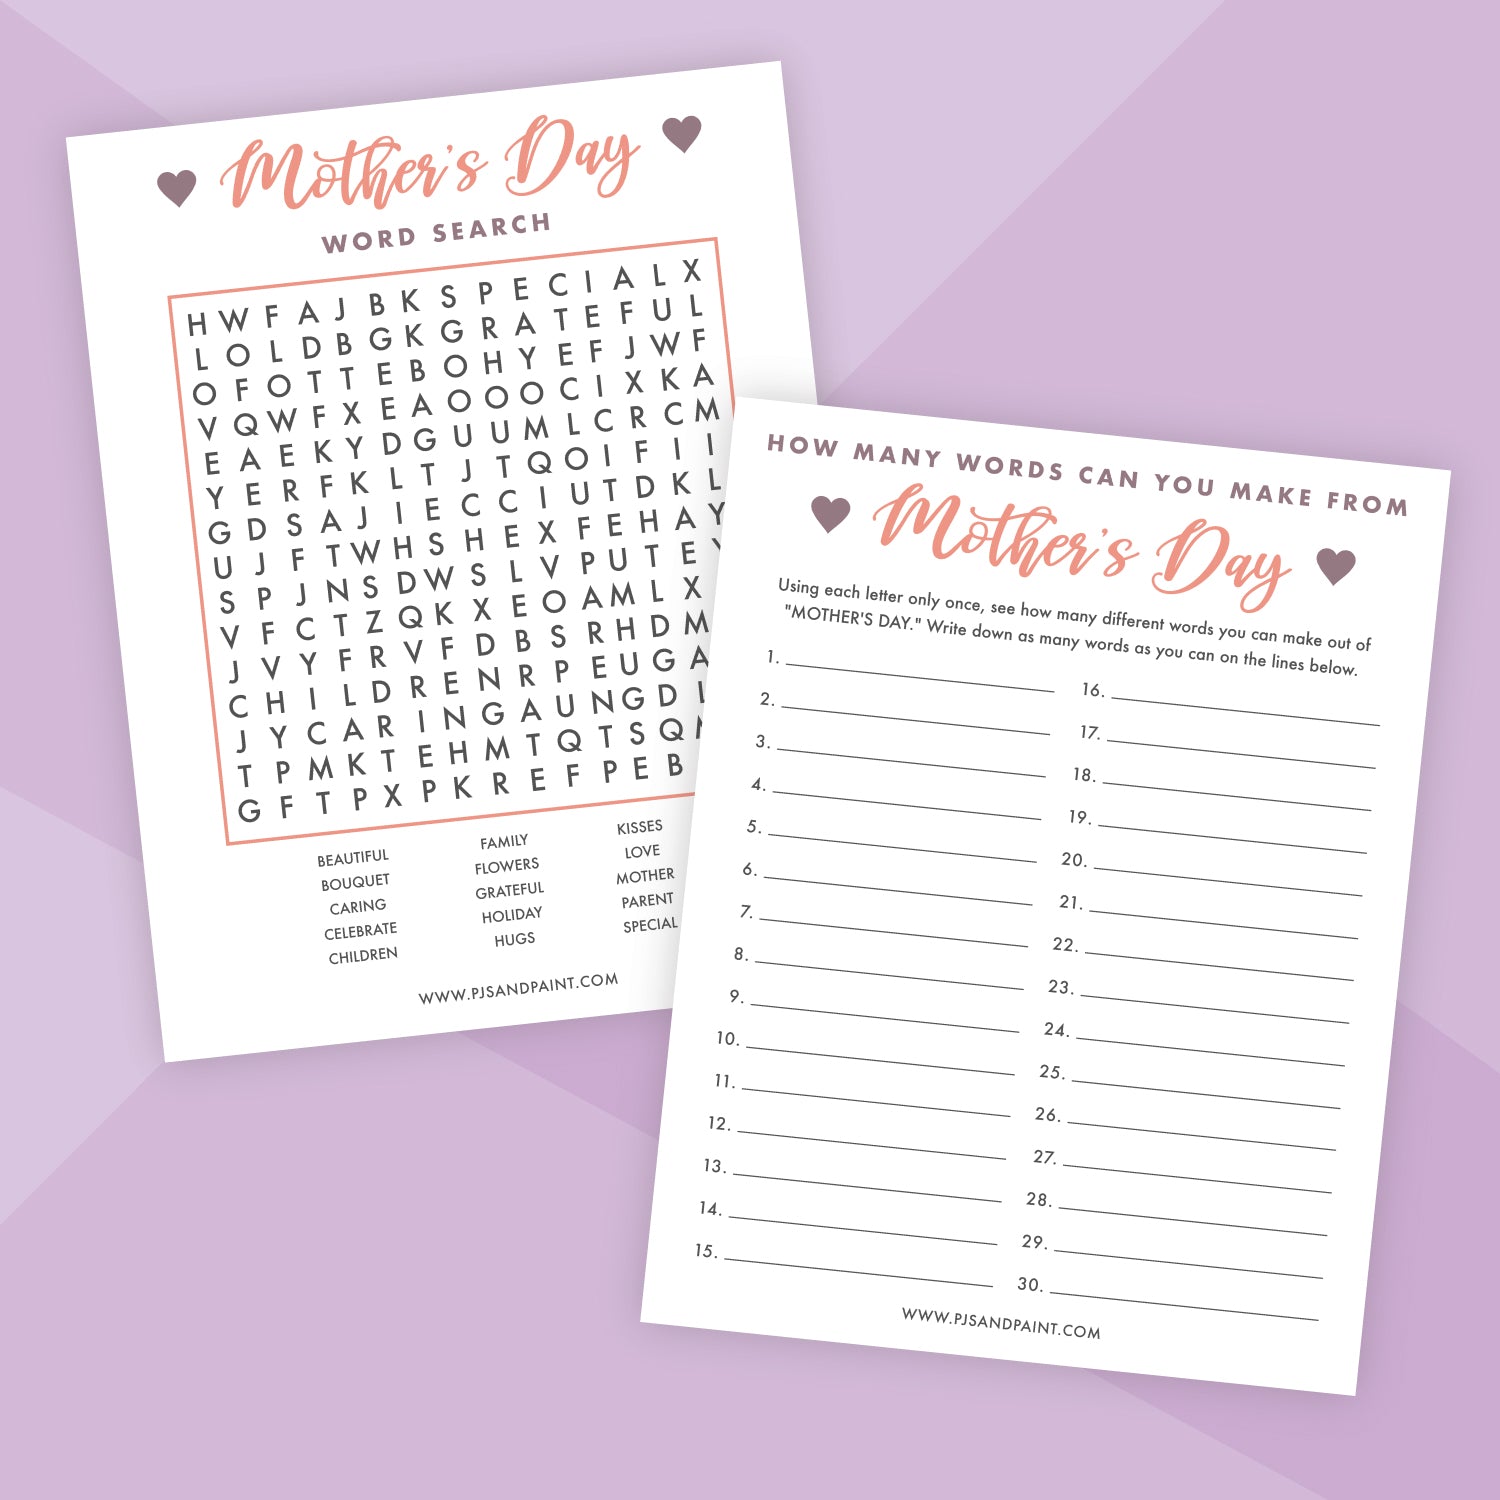 Mother's Day Activity Bundle